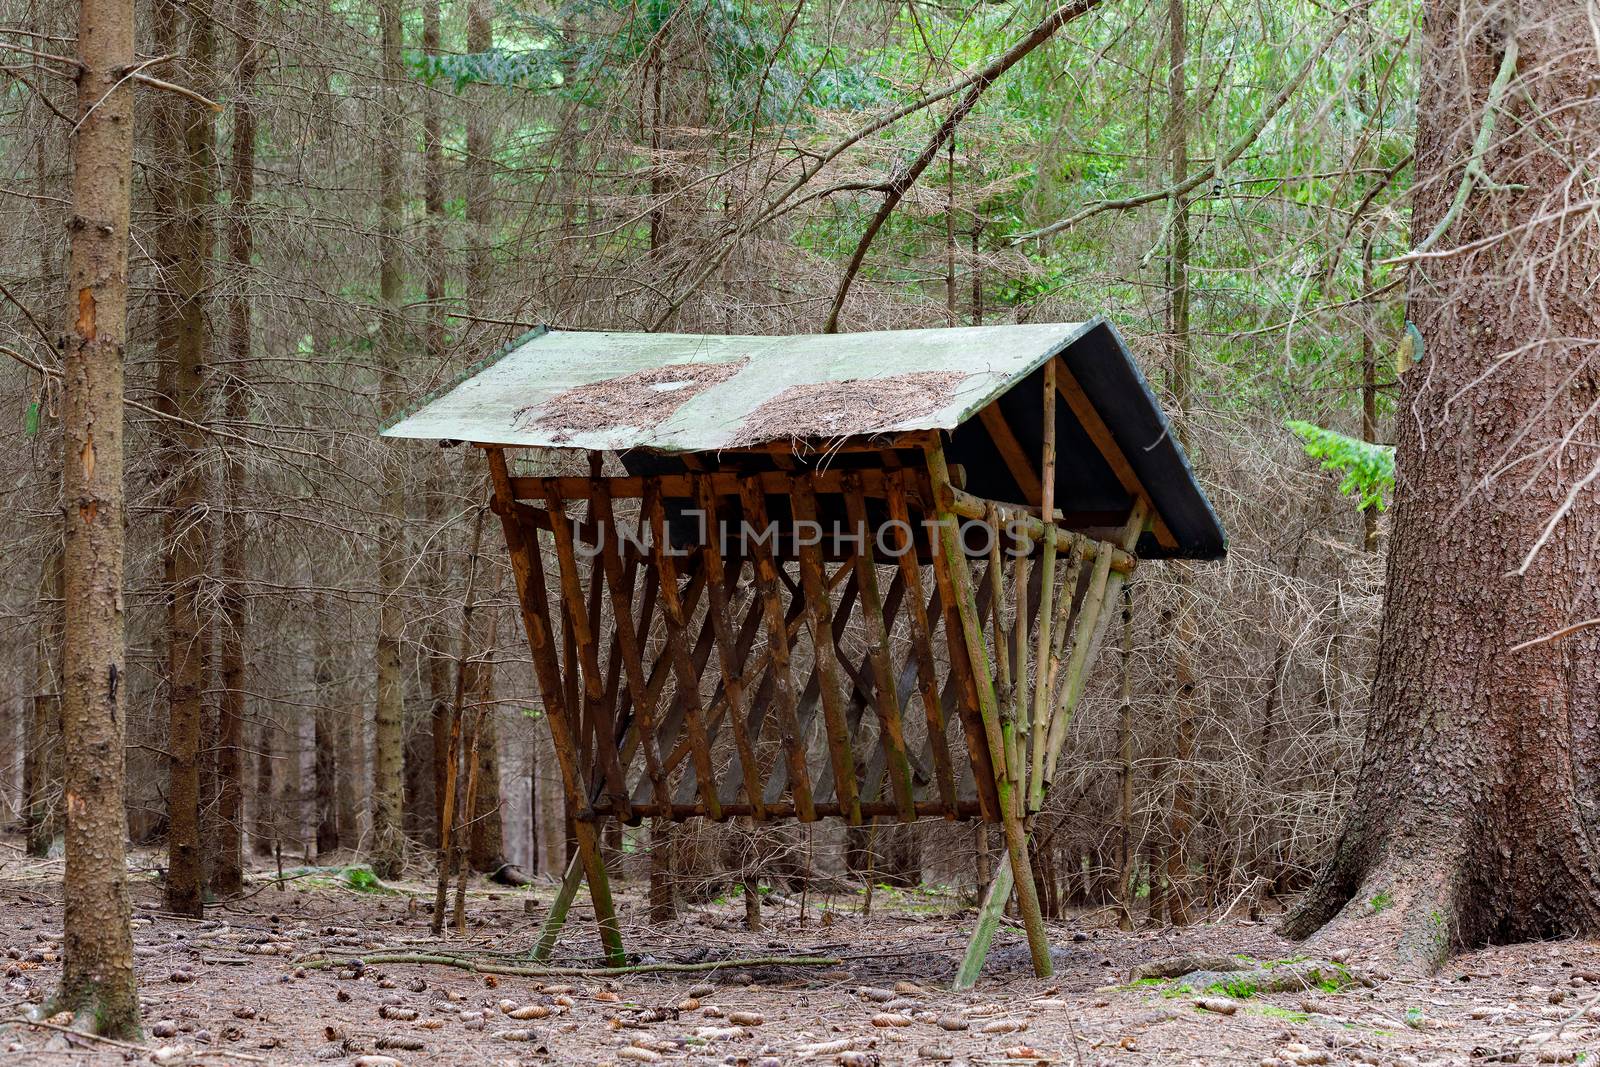 Hunting Feeder with roof for roe deer and wild animals in forest.